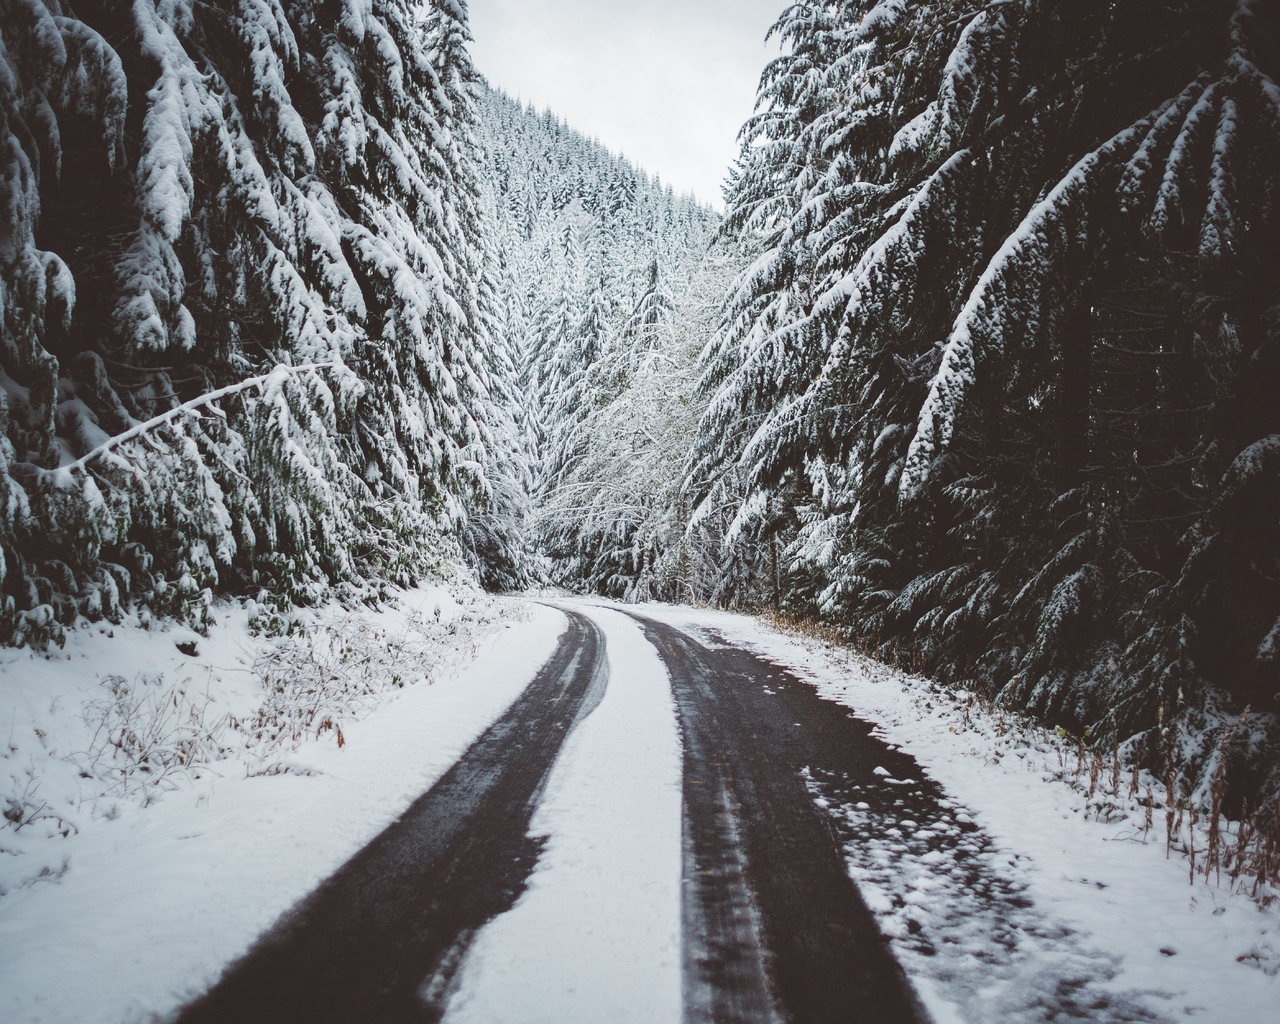 Image: Winter, forest, road, footprints, snow, landscape, nature, trees